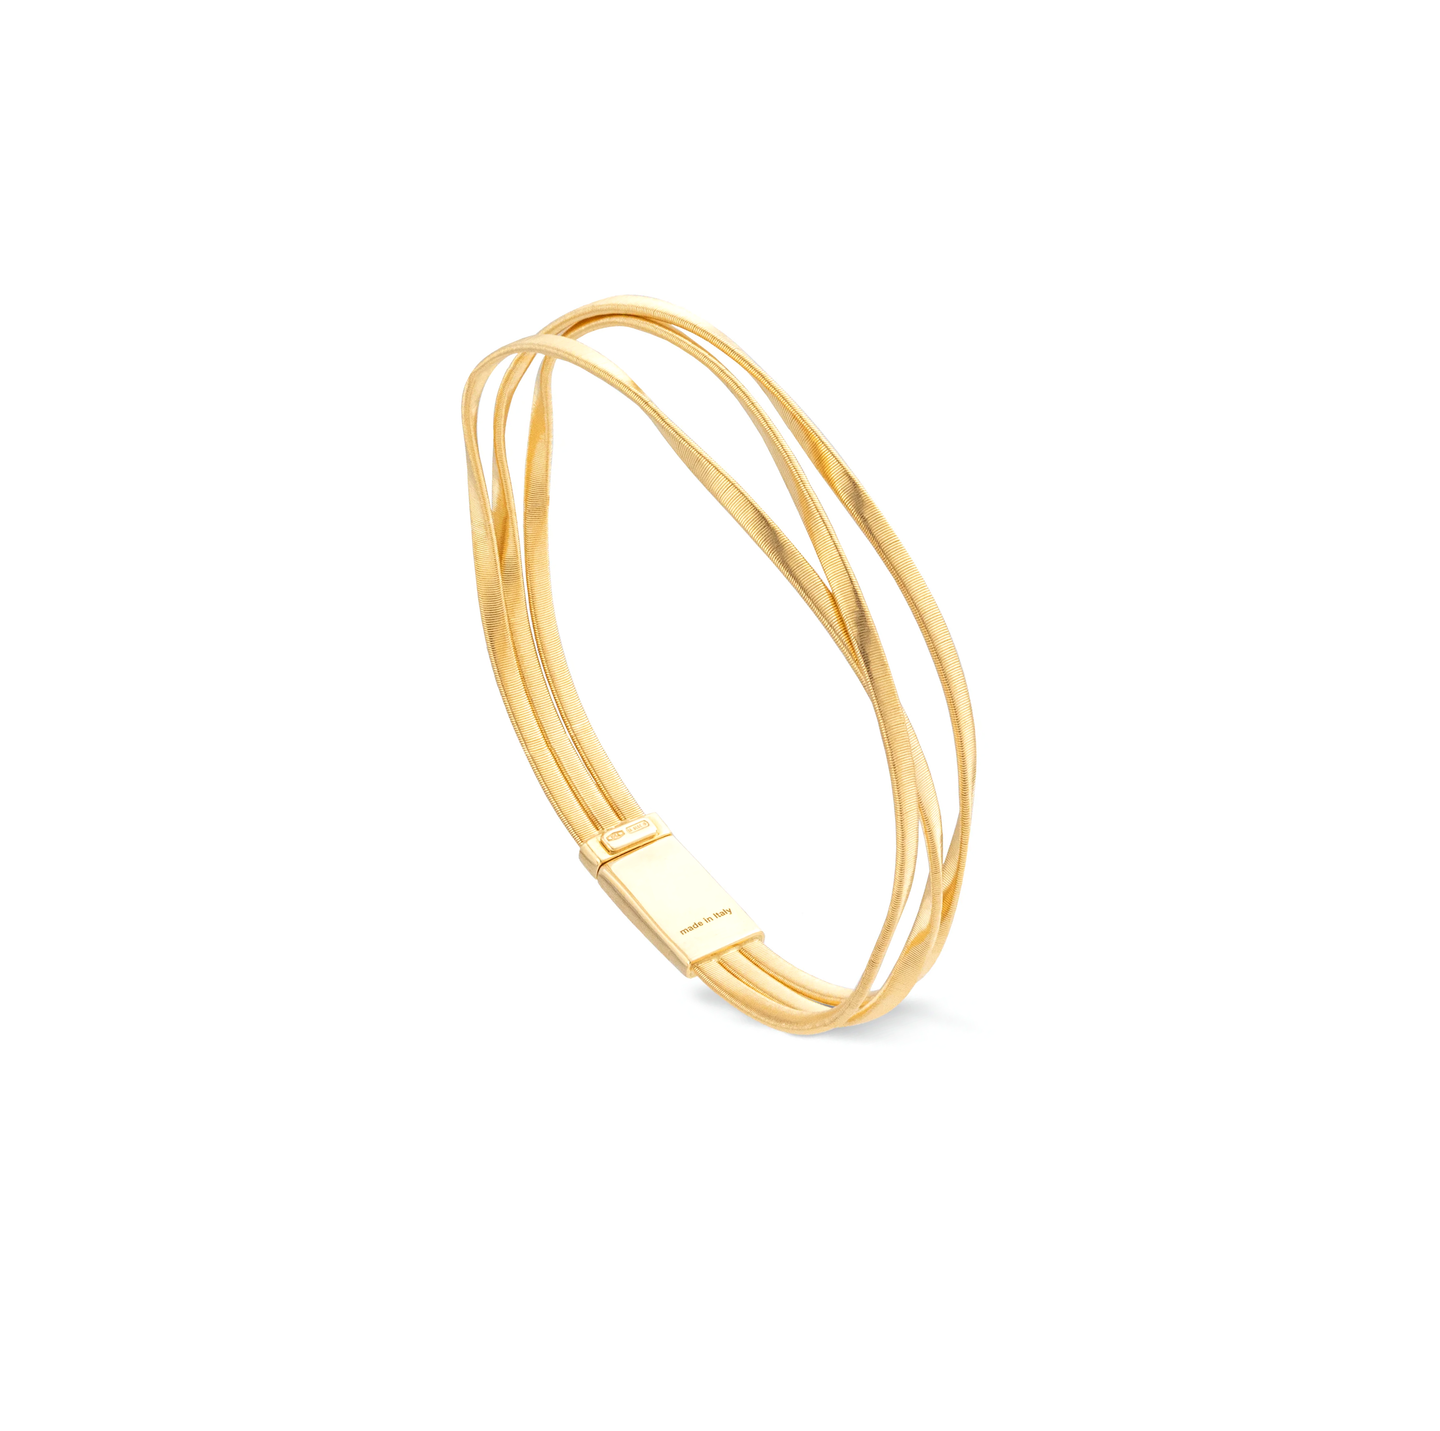 Marco Bicego Marrakech Yellow Gold Hand Twisted 3 Strand Coil Bangle